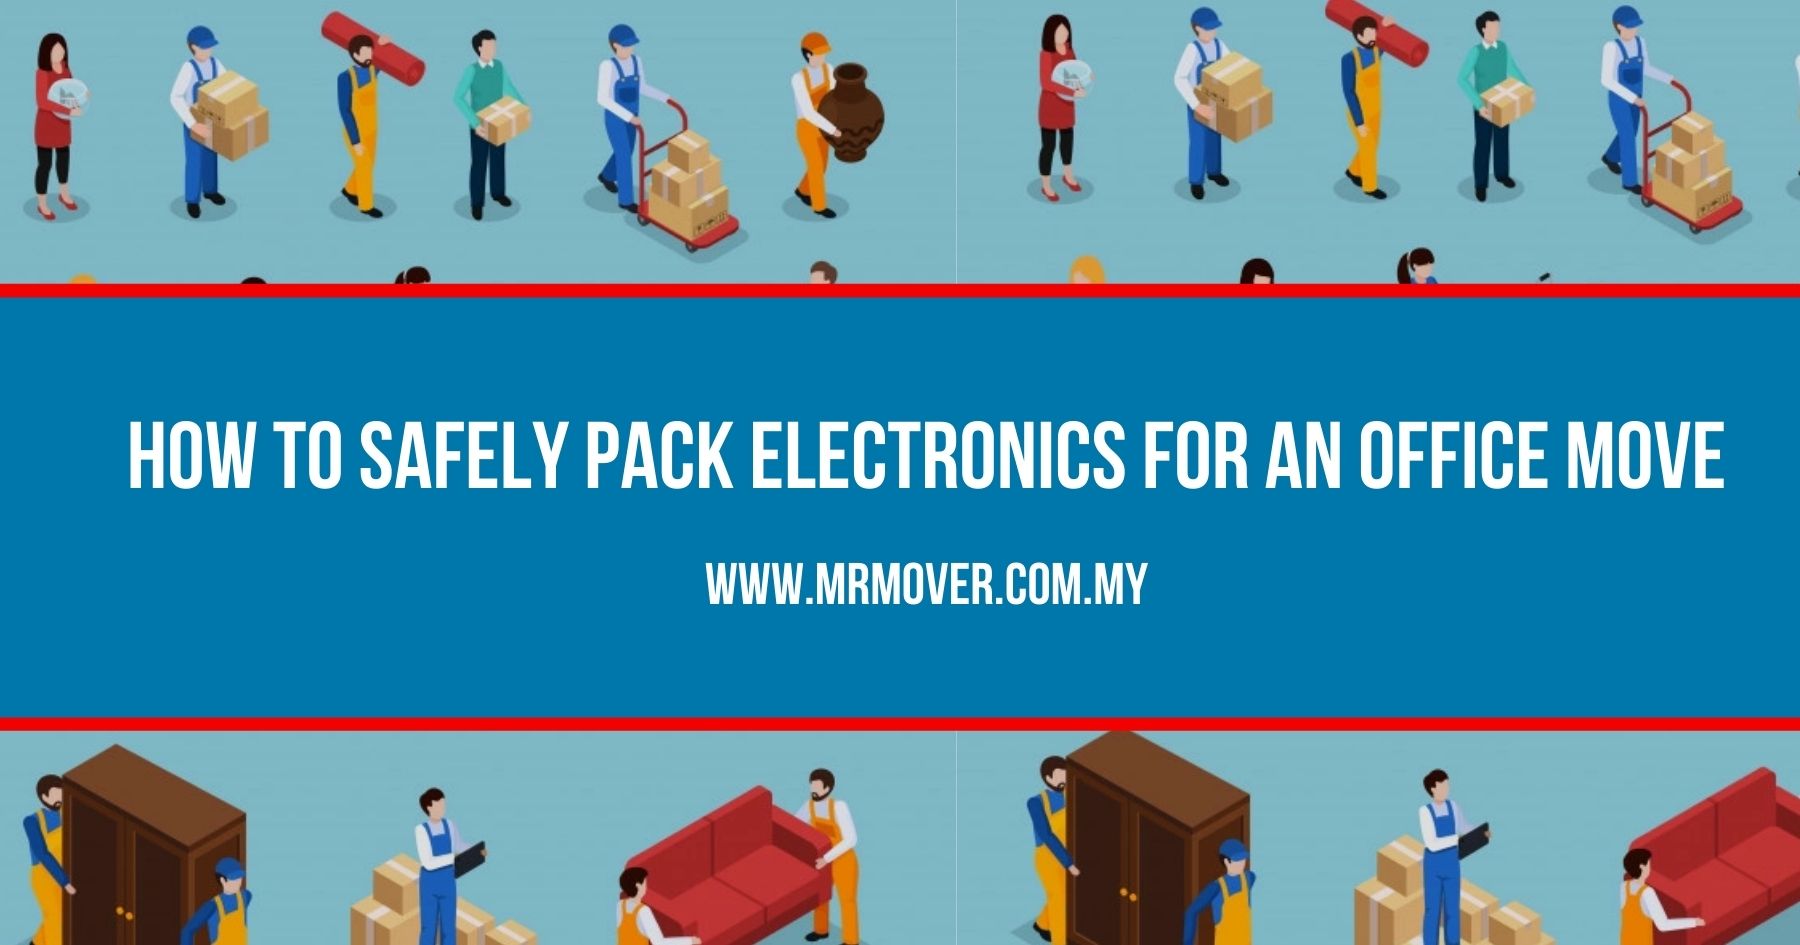 How to Safely Pack Electronics for an Office Move